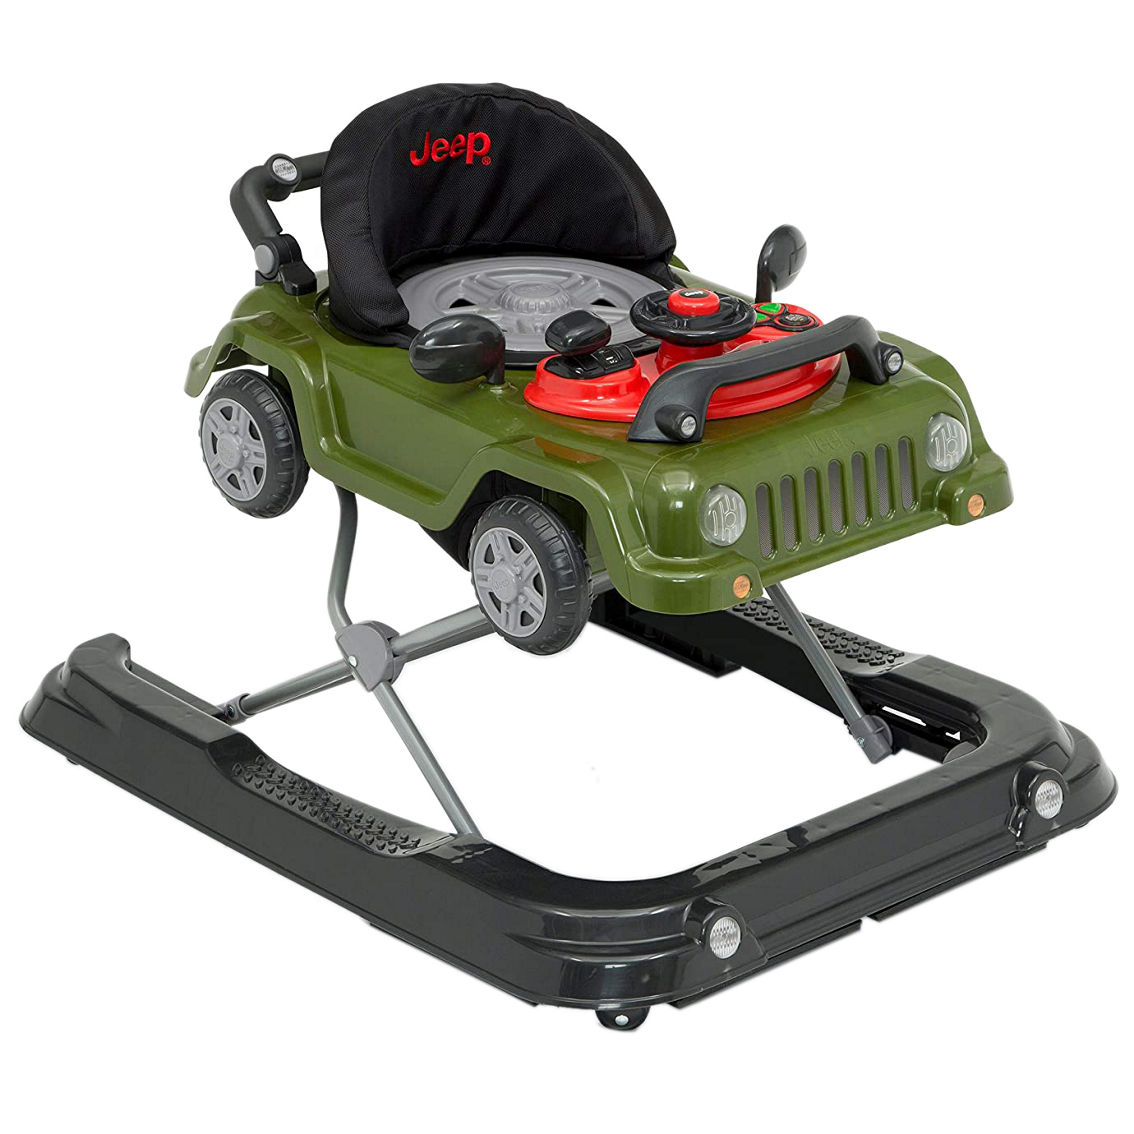 Jeep Classic Wrangler 3-in-1 Grow with me Walker